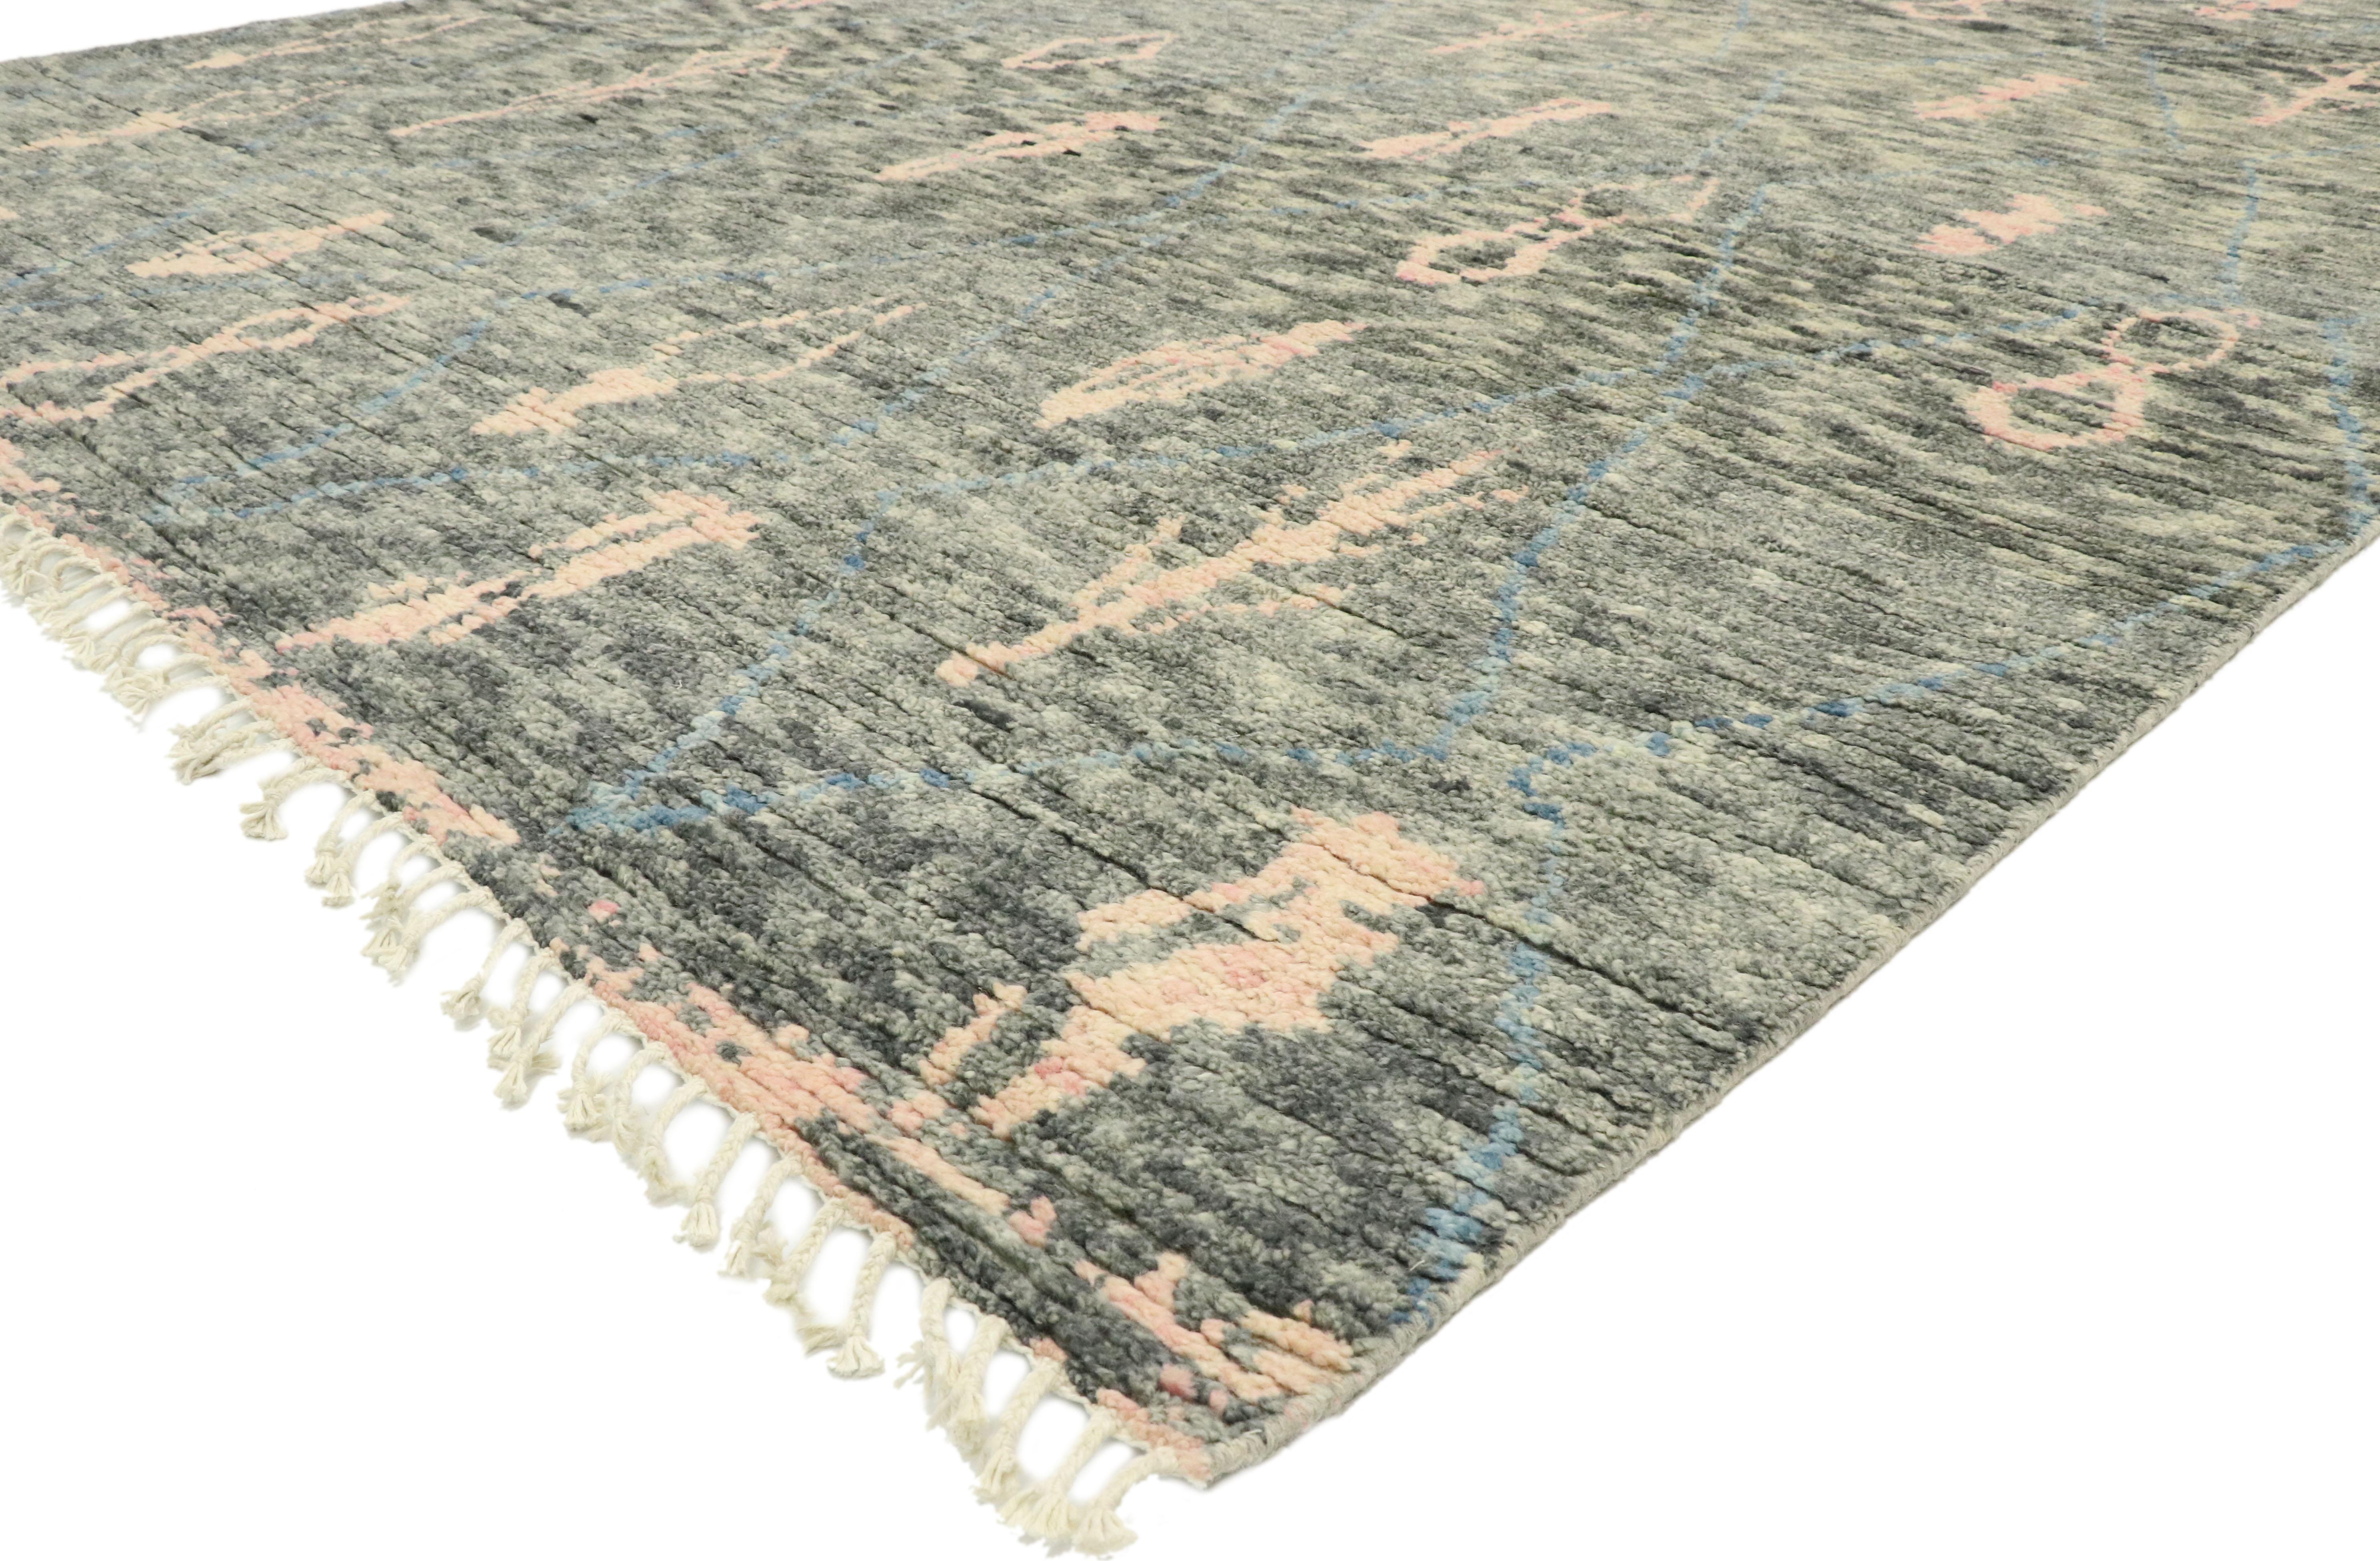 80632, new contemporary Moroccan Area rug with Scandinavian boho chic tribal style. With its subtle yet expressive design, incredible detail and texture, this contemporary Moroccan area rug is a captivating vision of woven beauty showcasing